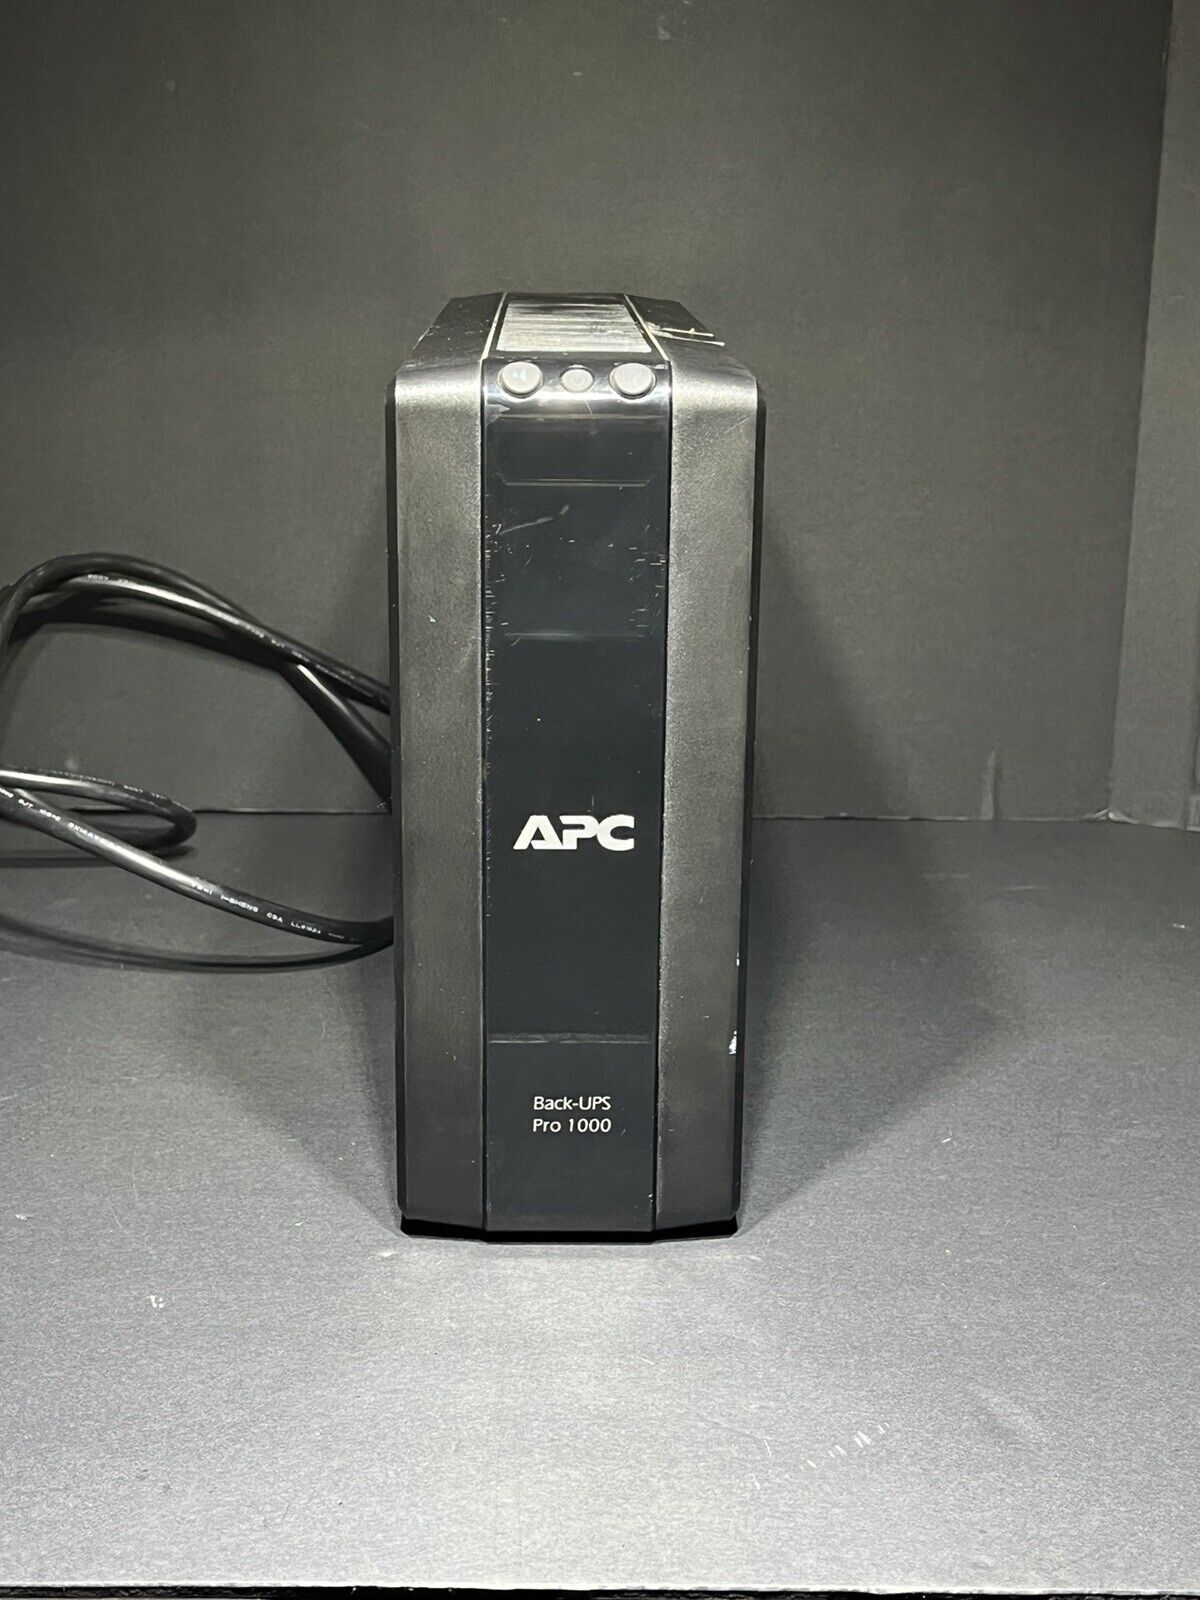 APC Back-UPS Pro 1000  Batteries Not Included